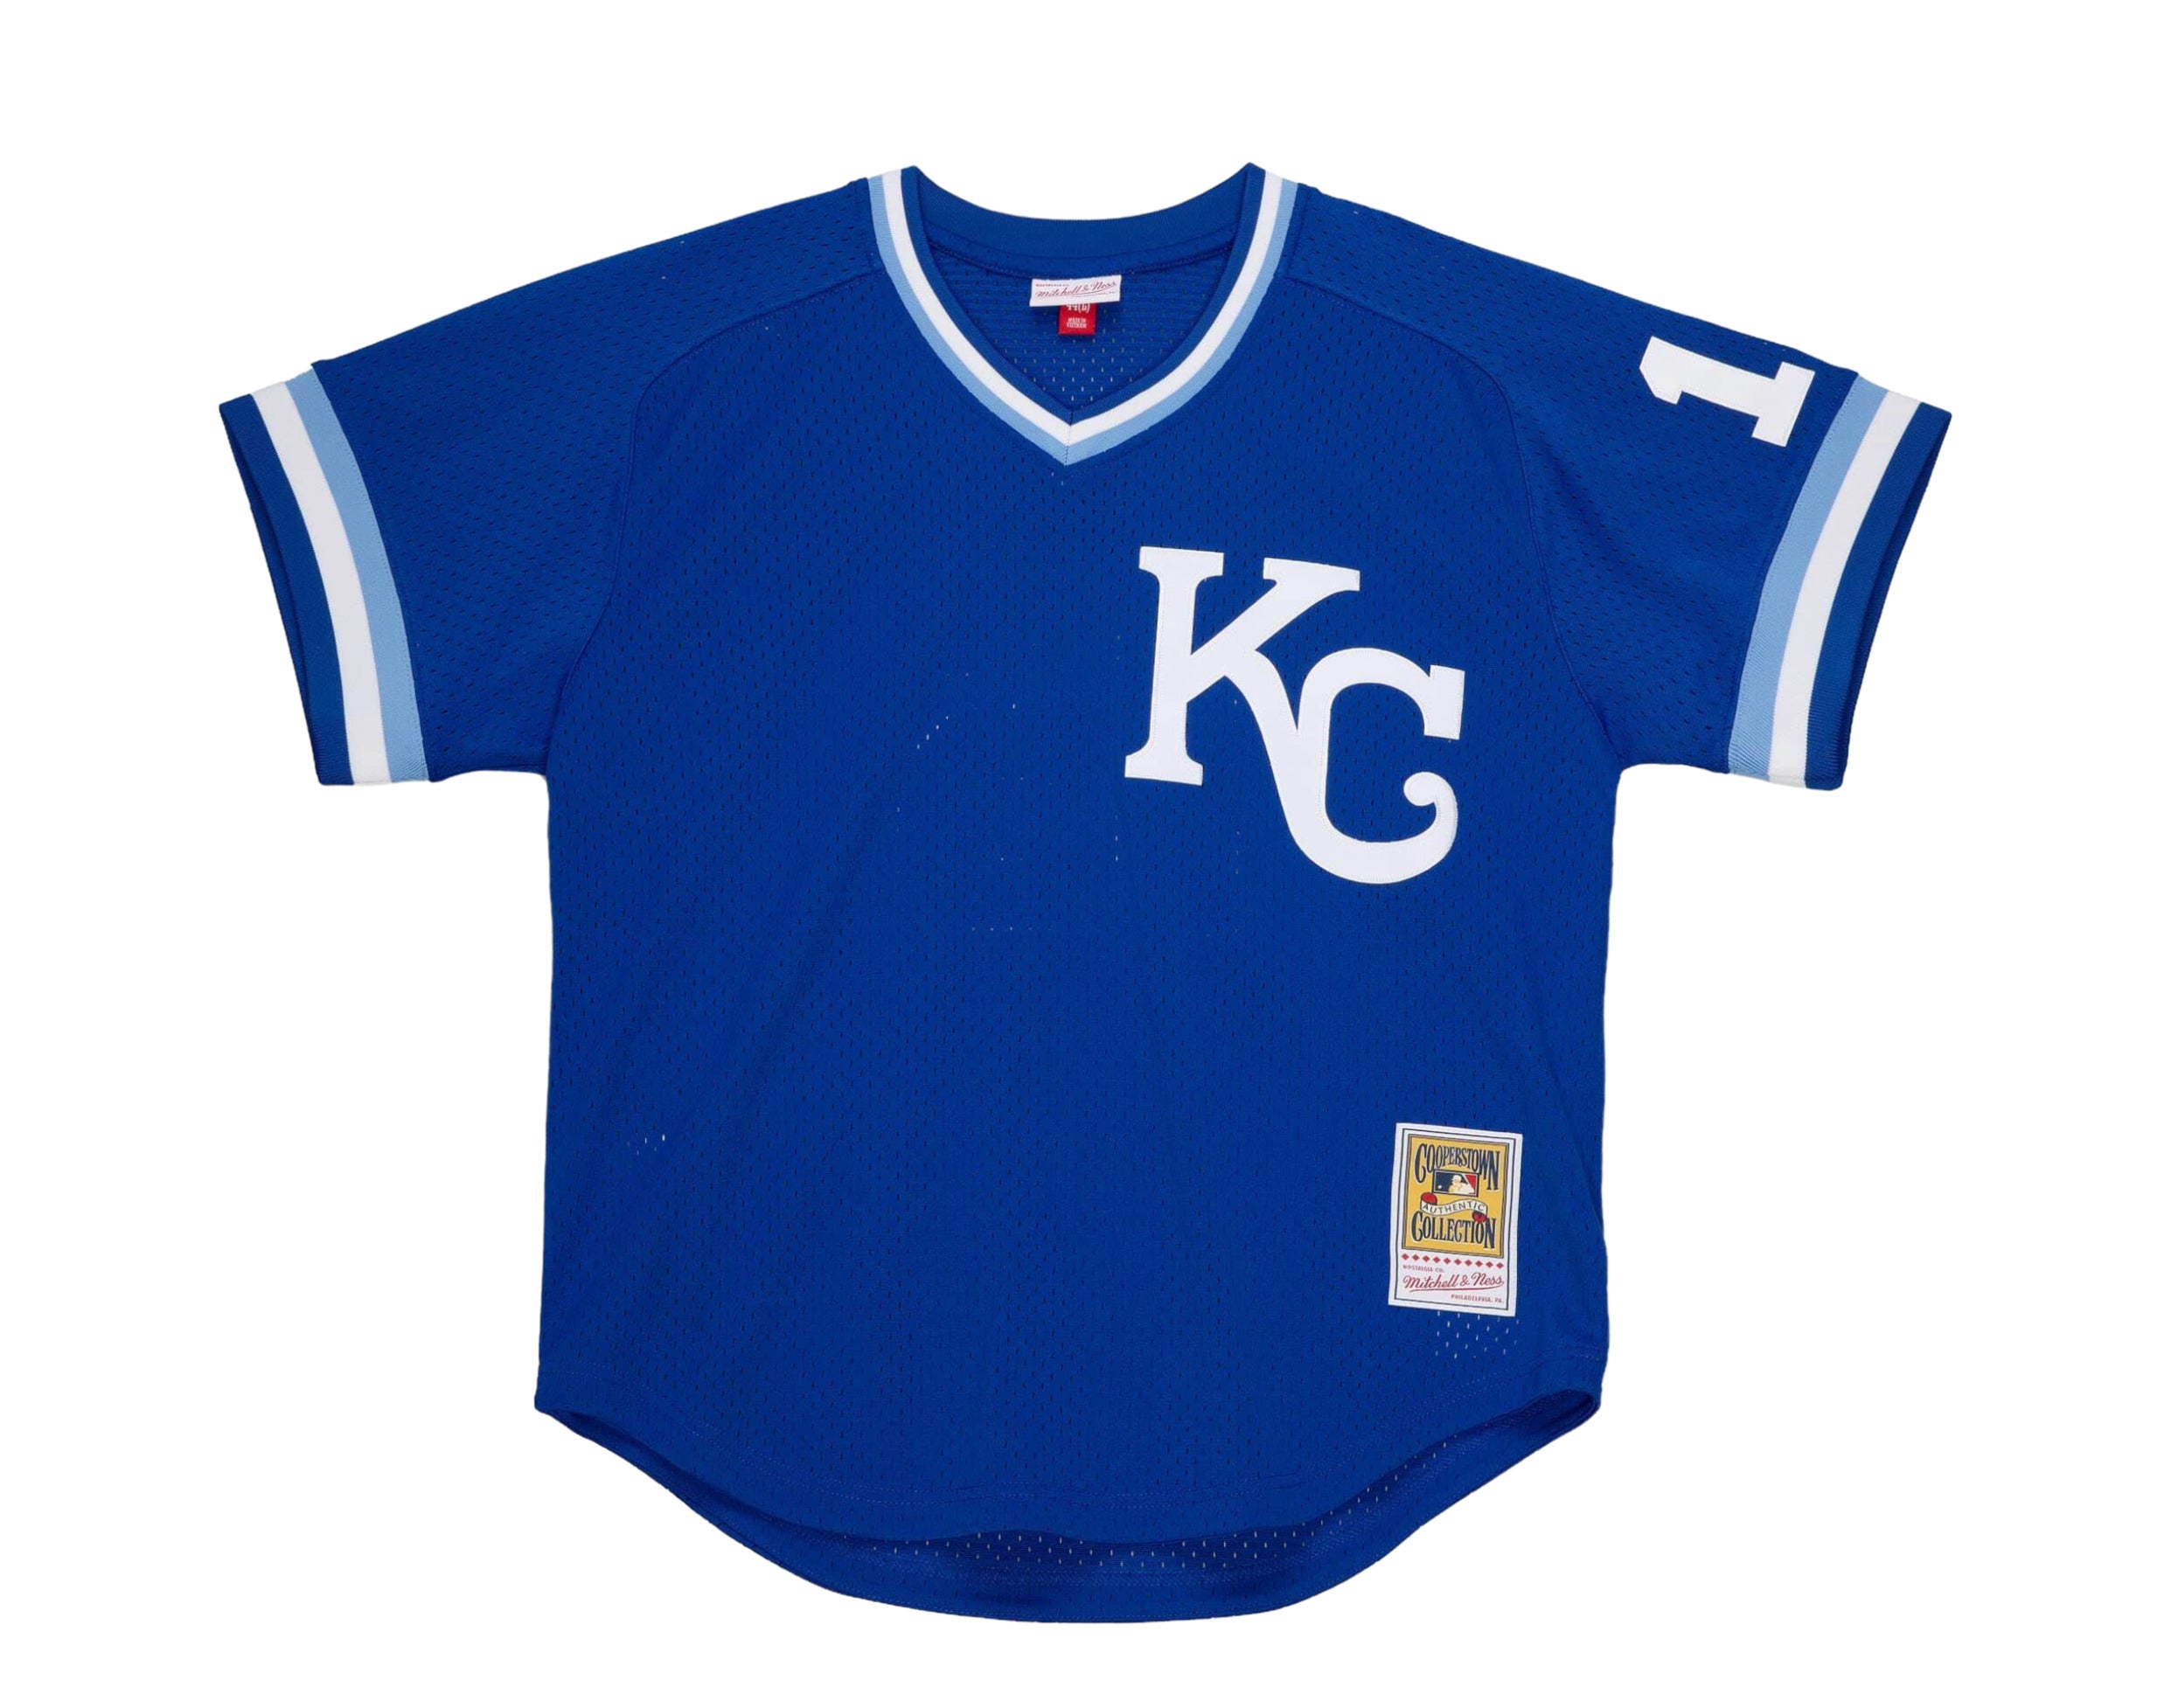 Men’s Kansas City Royals Bo Jackson Mitchell & Ness Royal 1989 Authentic Cooperstown Collection Batting Mesh Practice Jersey - S